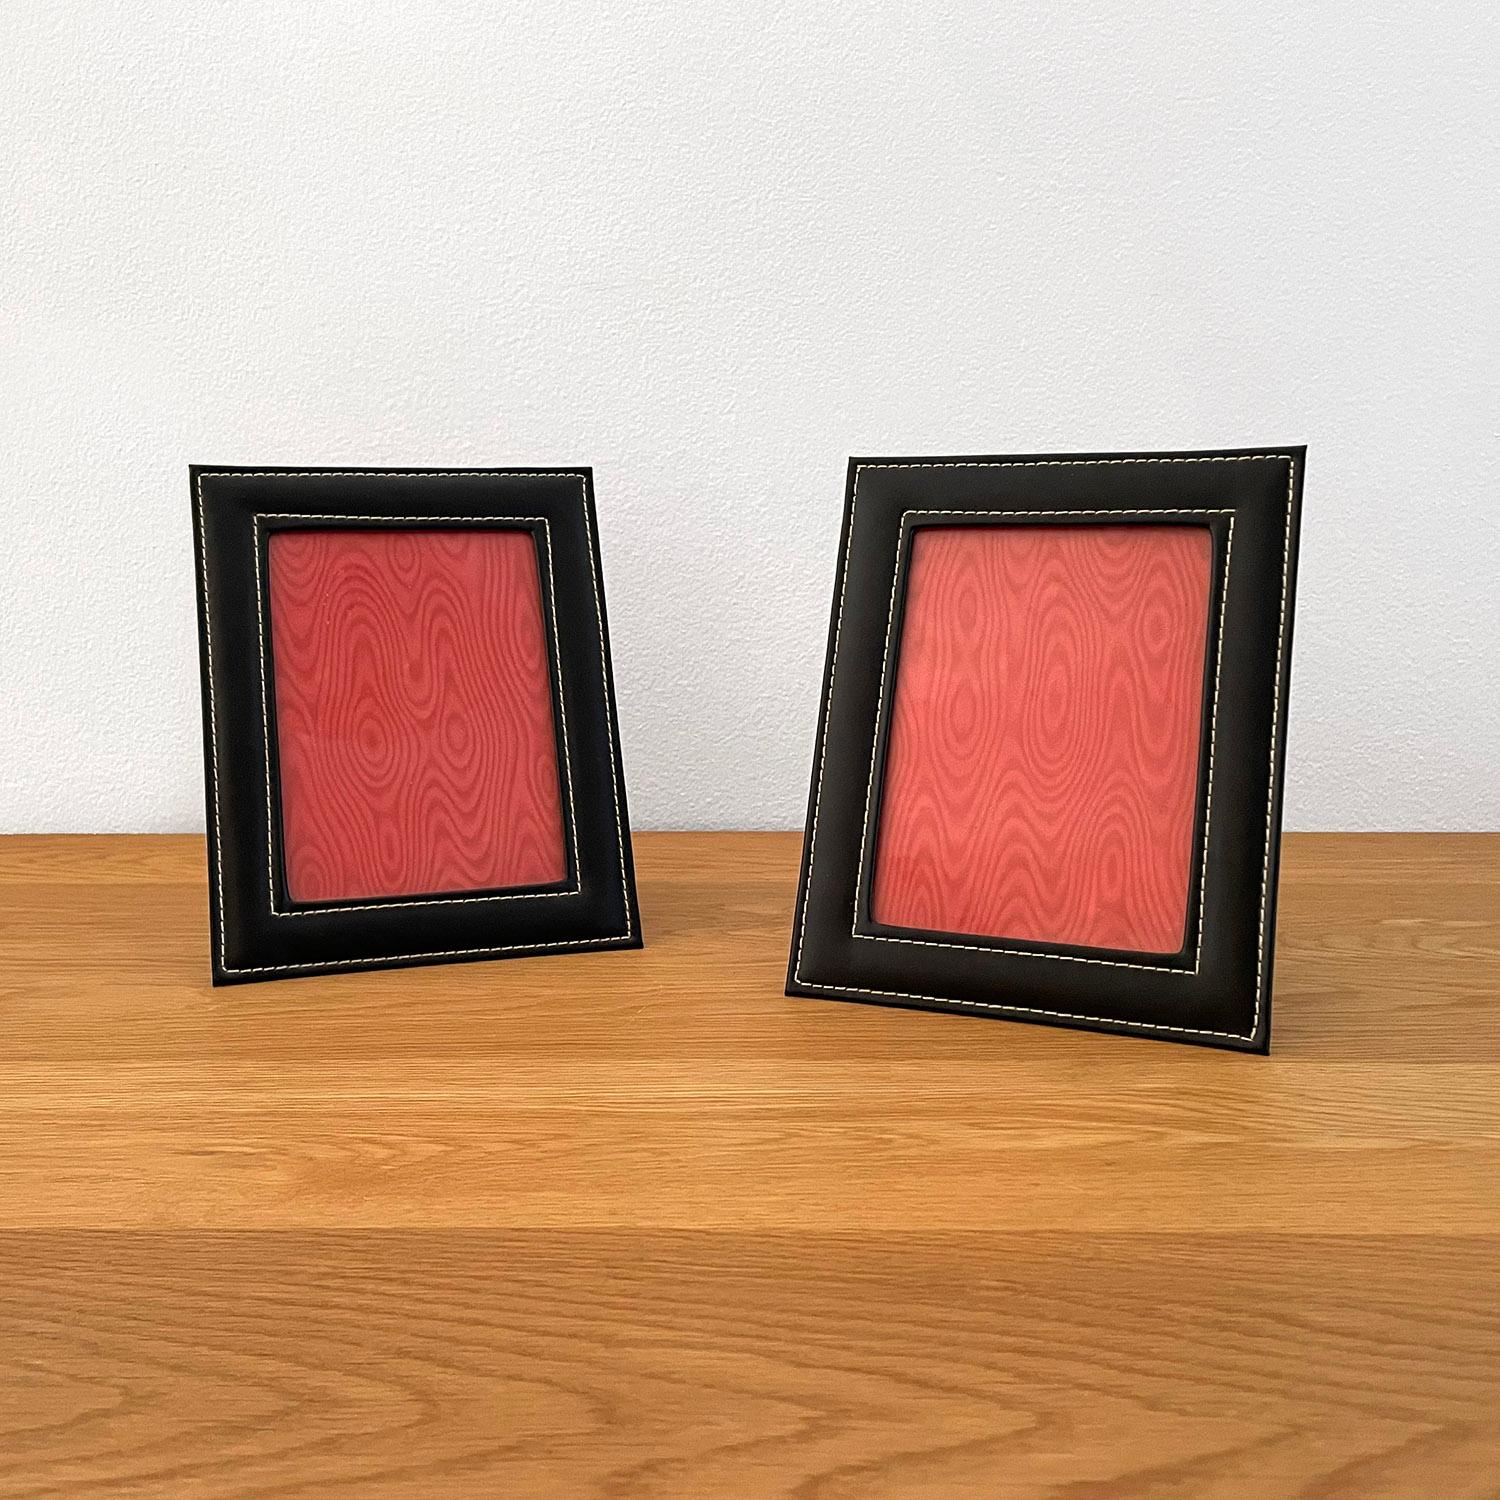 Pair of French leather picture frames in the style of Jacques Adnet.
France, circa 1950’s.
Rich black leather with contrast stitching.
Light surface markings.
In good vintage condition.